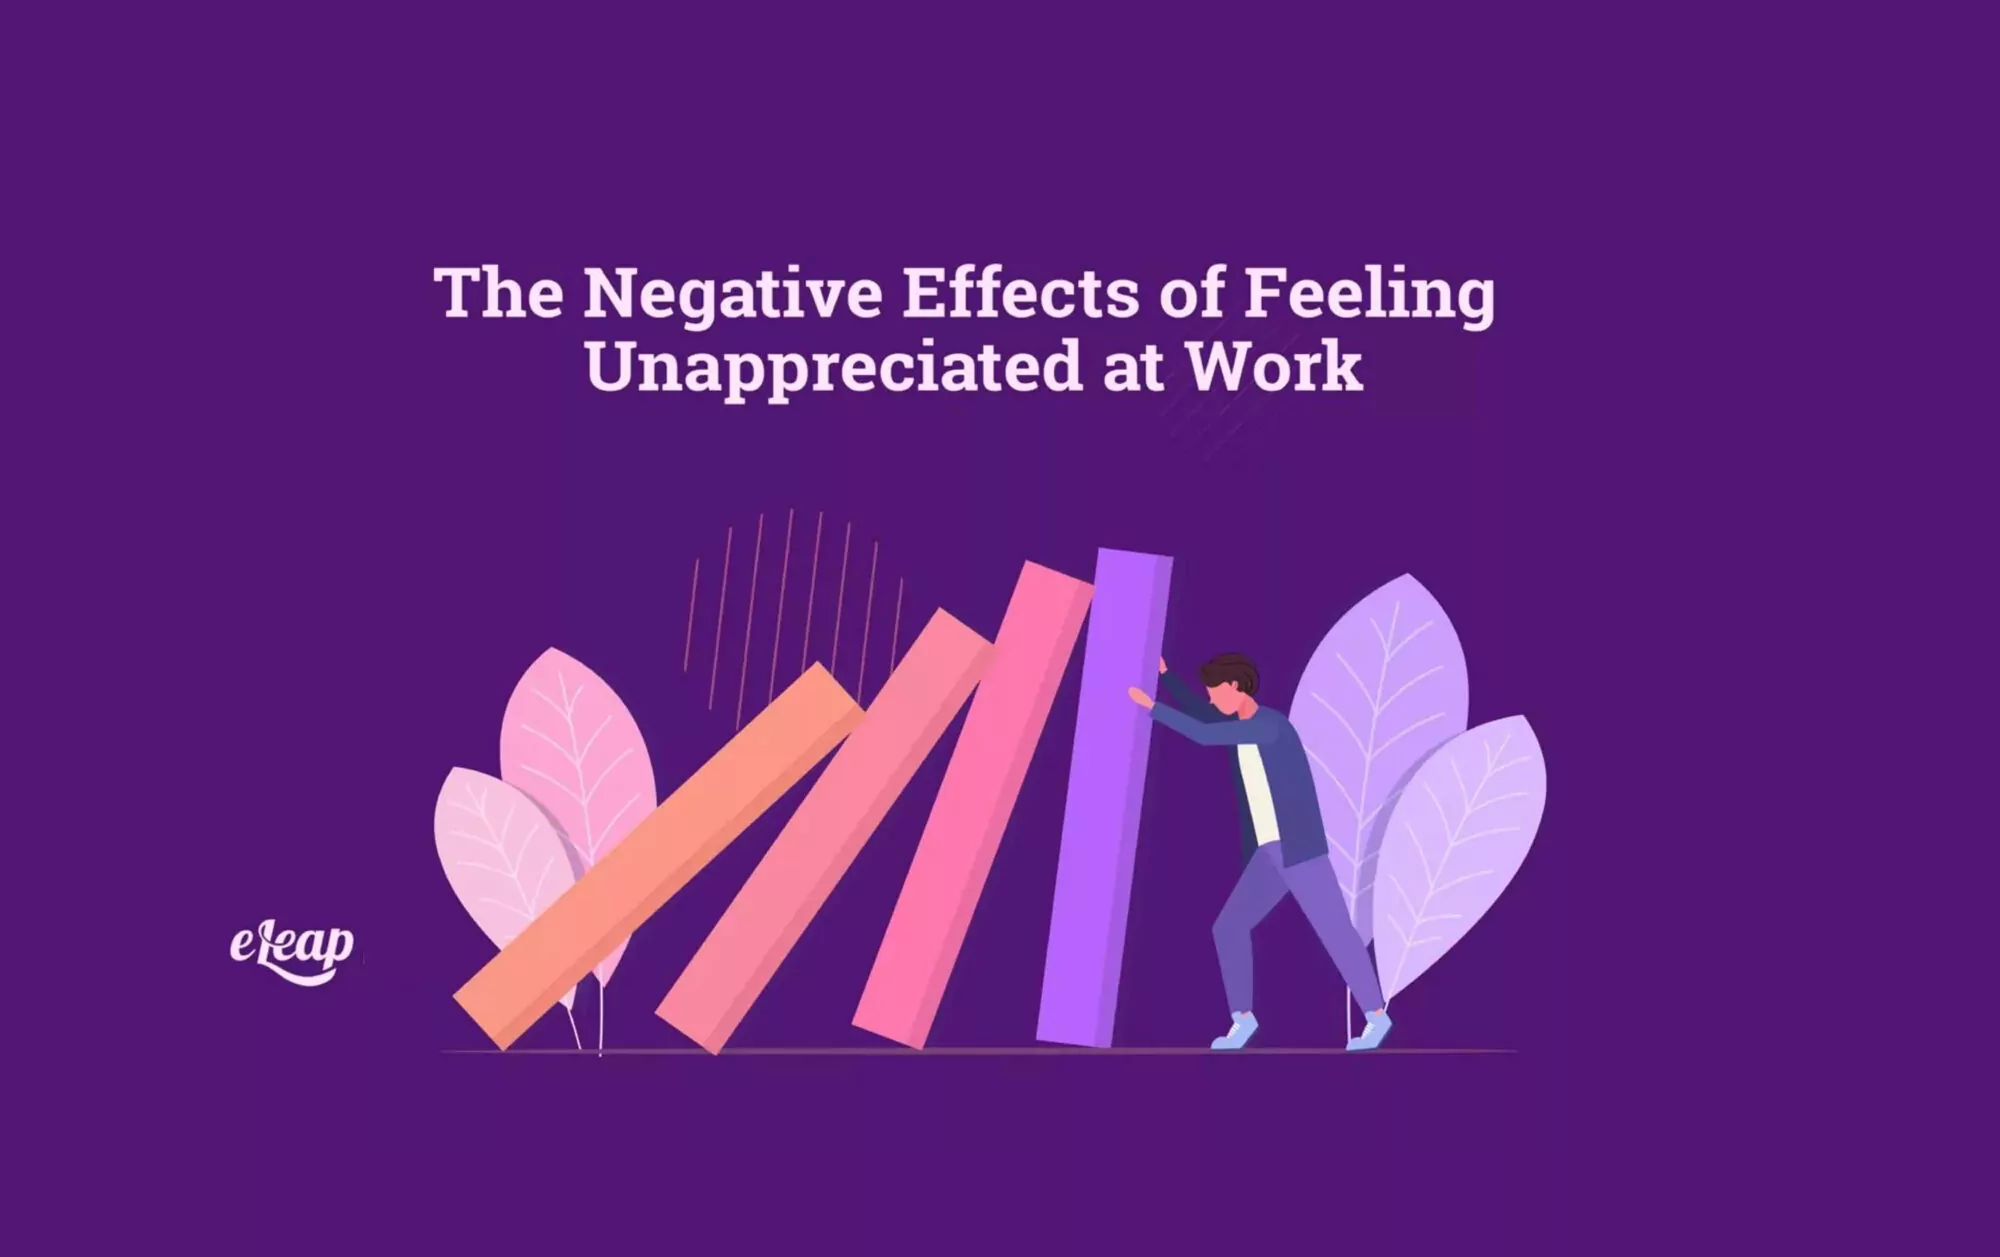 The Negative Effects of Feeling Unappreciated at Work